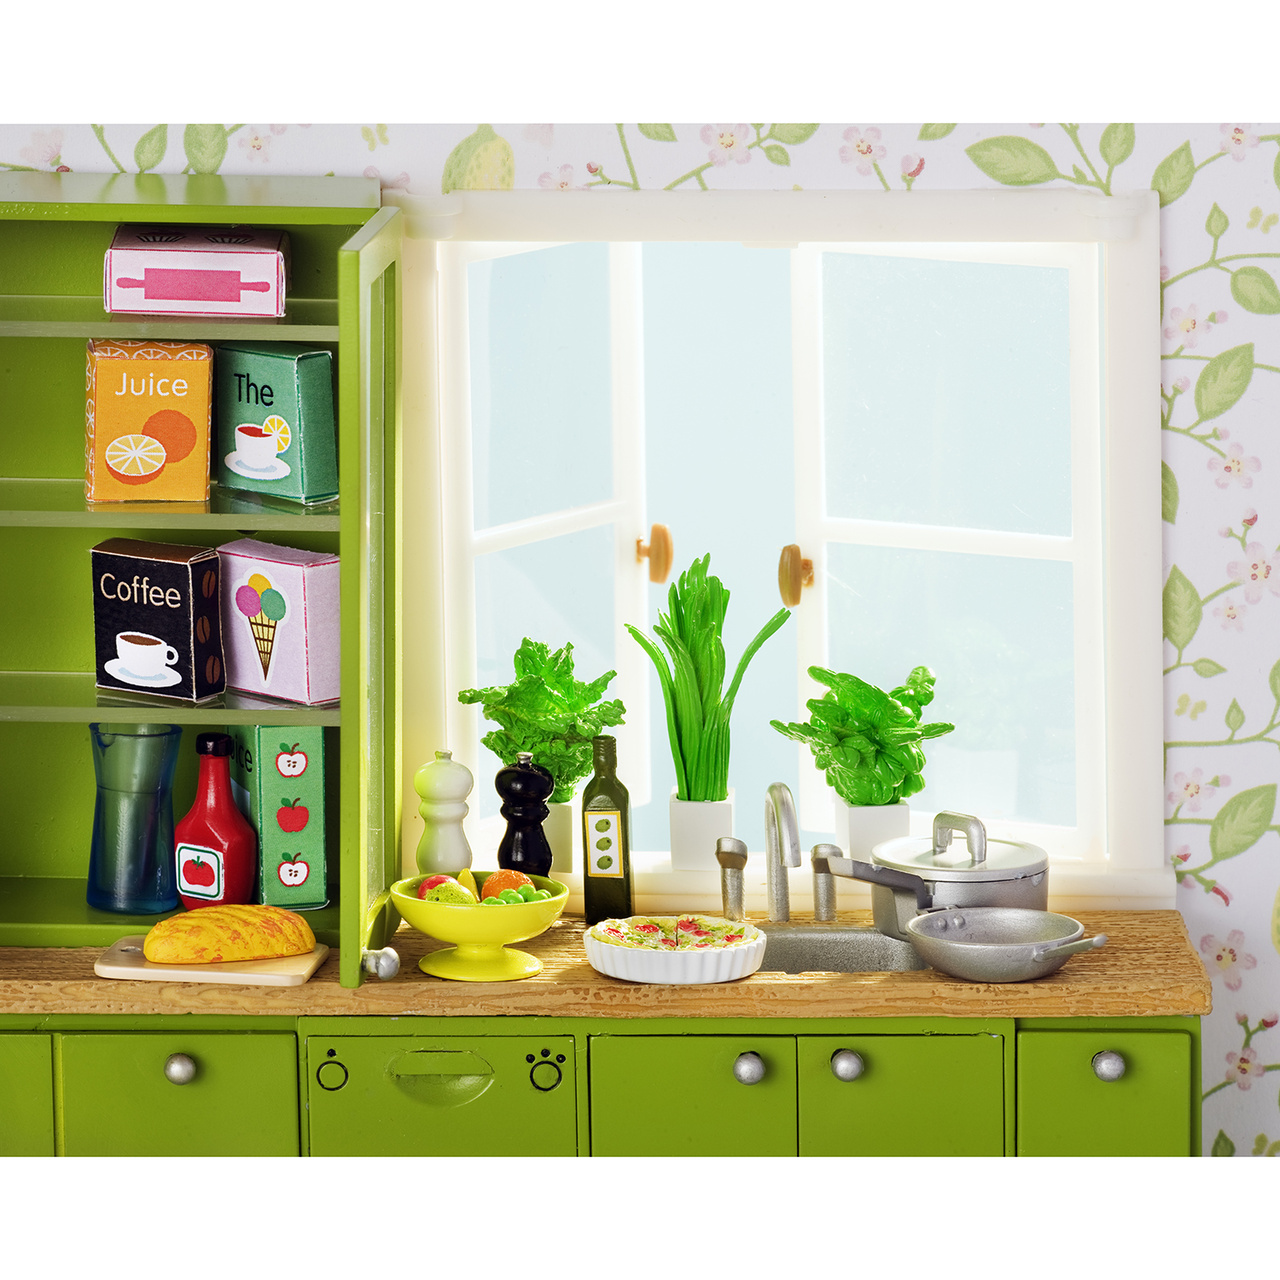 Doll house furniture & doll house accessories lundby dollhouse accessories kitchen